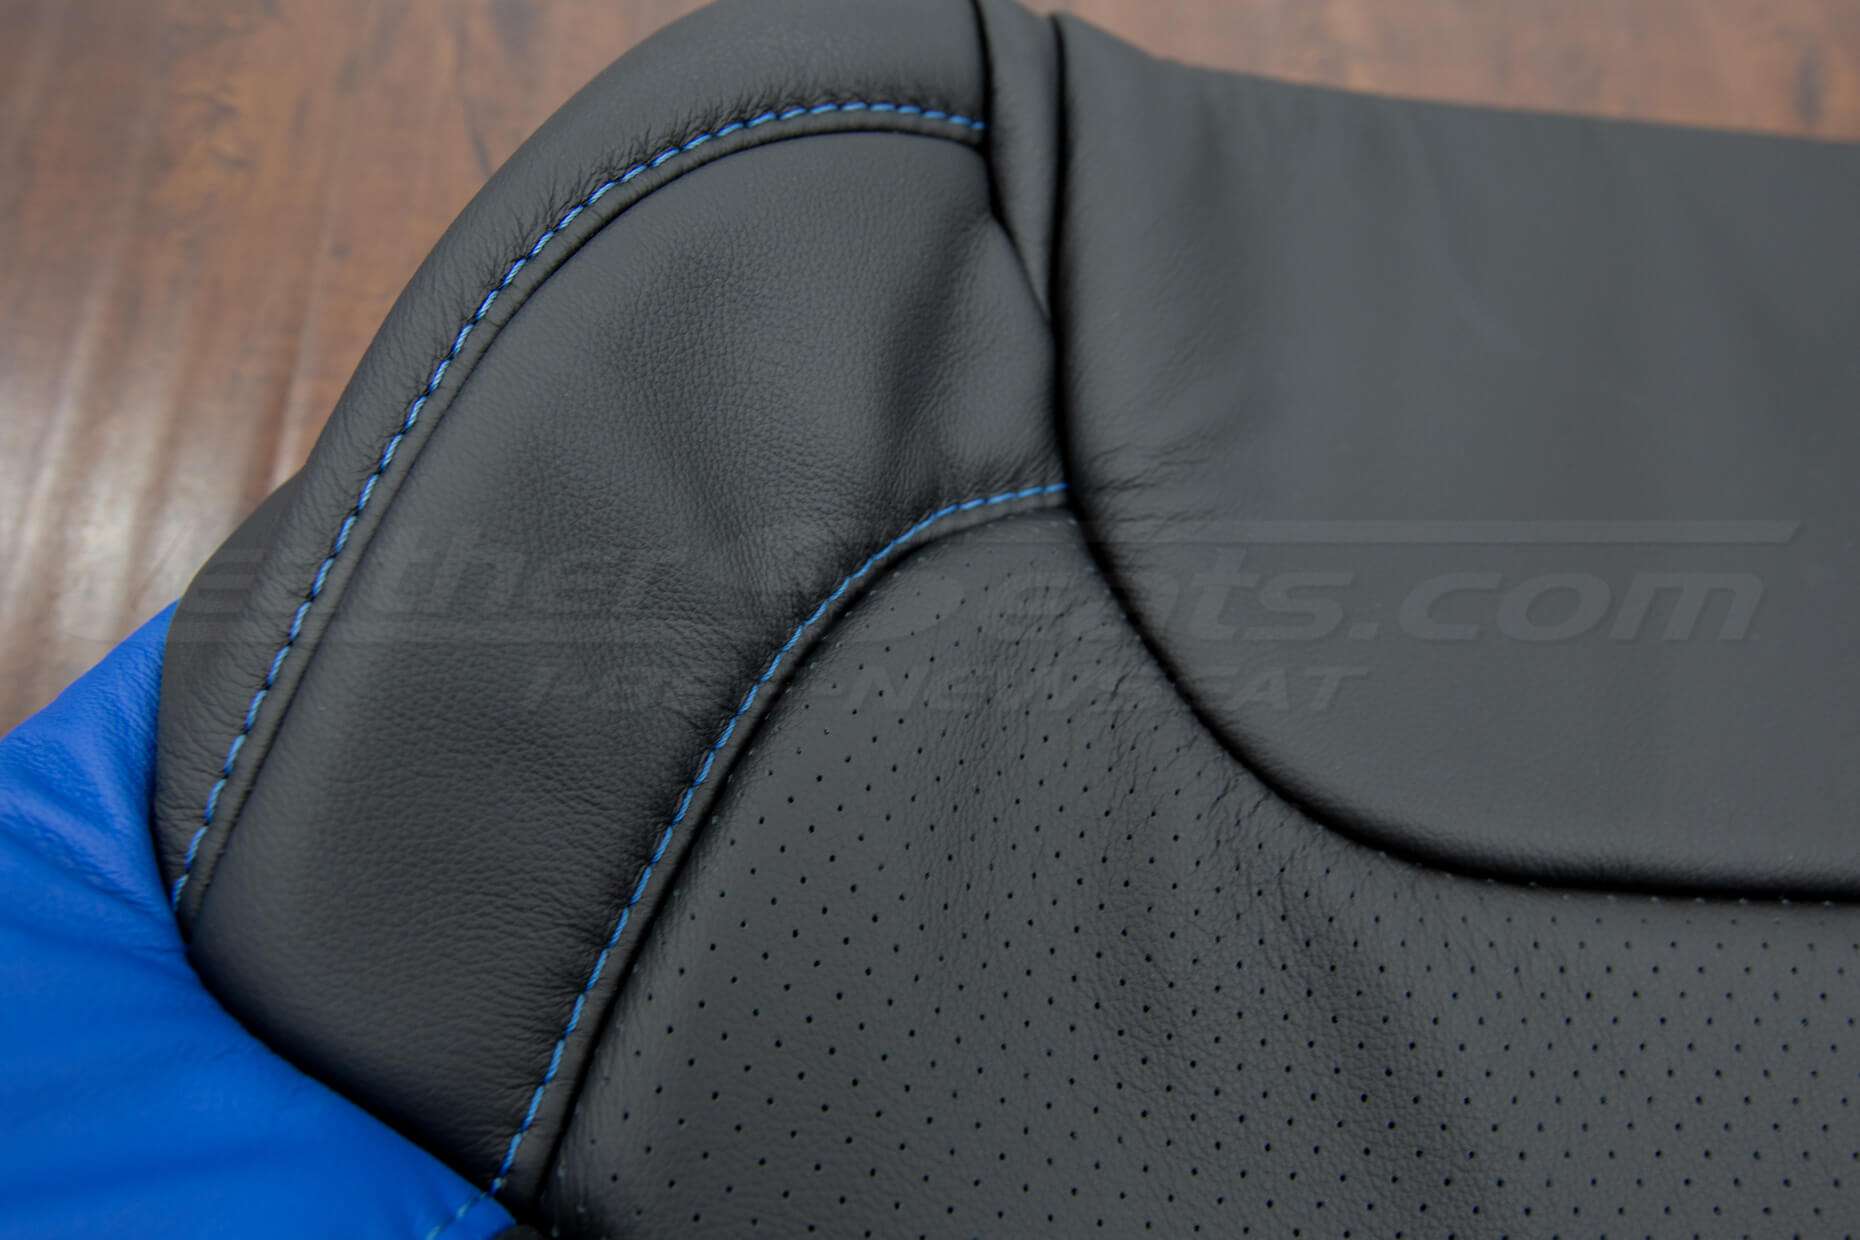 Ford Raptor Upholstery Kit - Black & Cobalt - Perforation and cobalt double-stitching